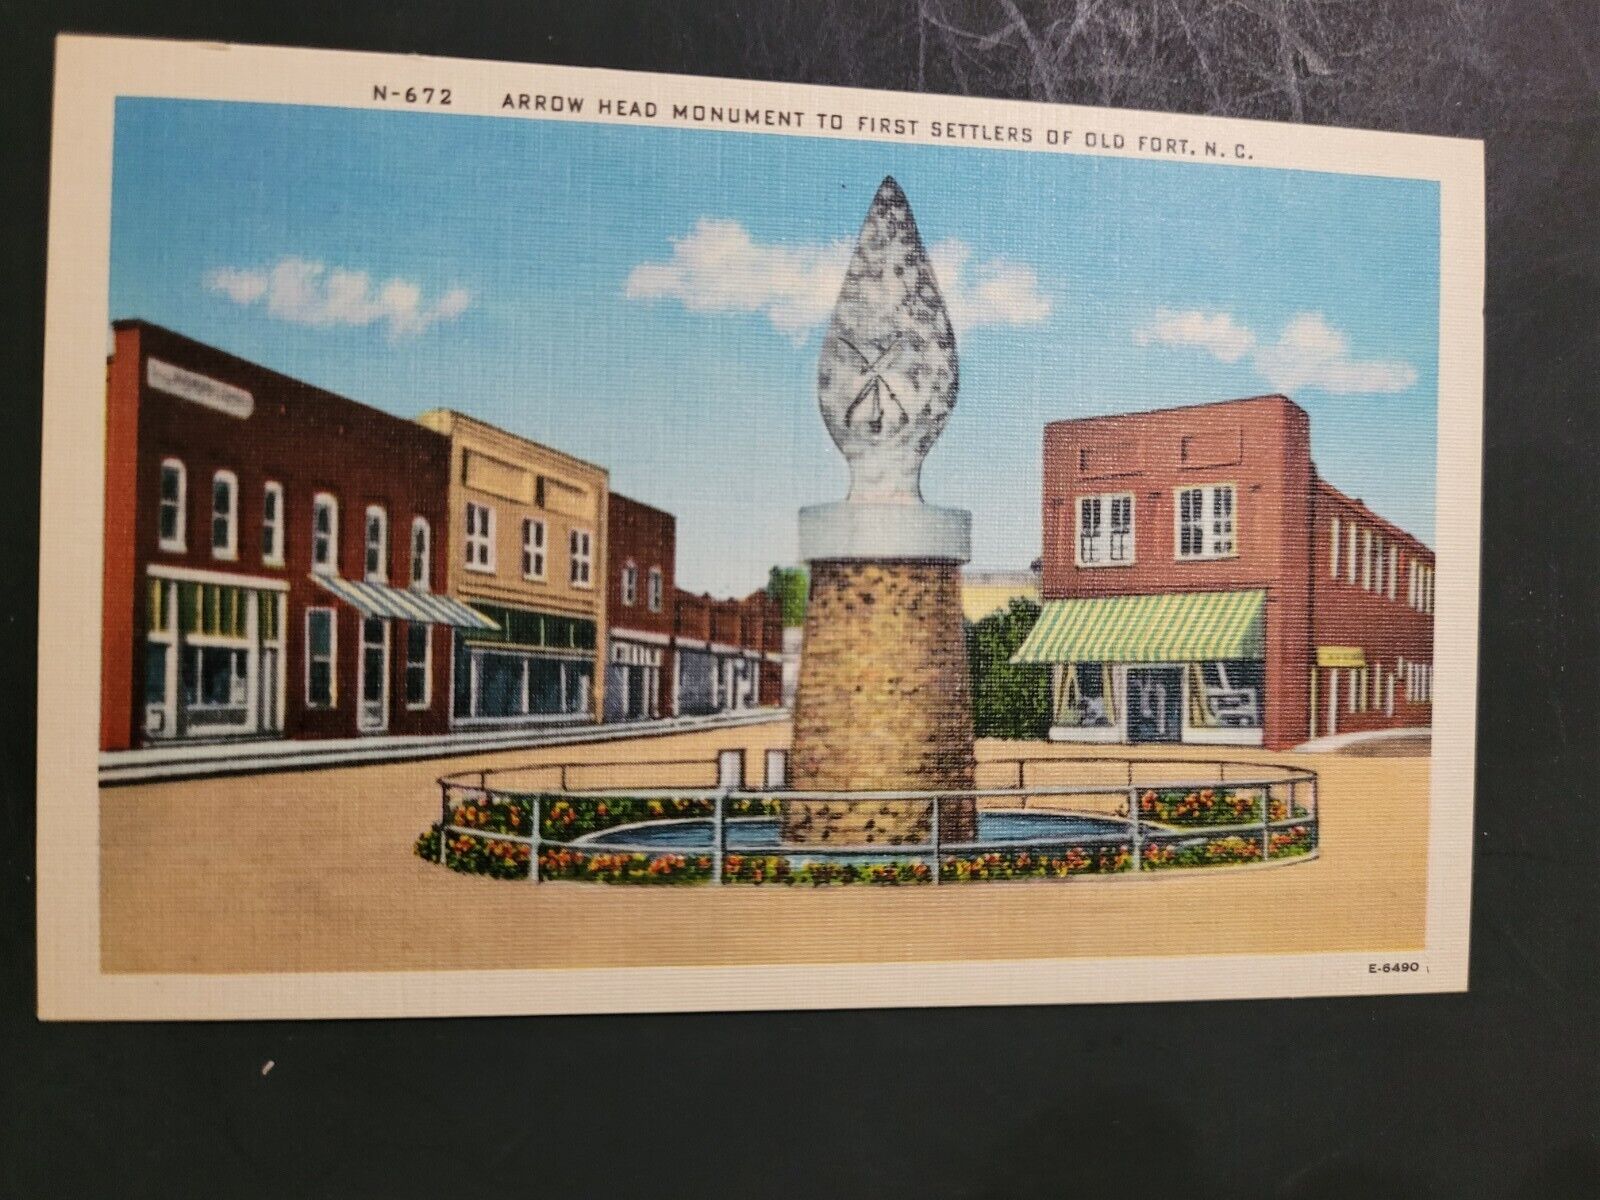 Vintage Linen Postcard Arrow Head Monument To First Settlers Old Fort N.C.